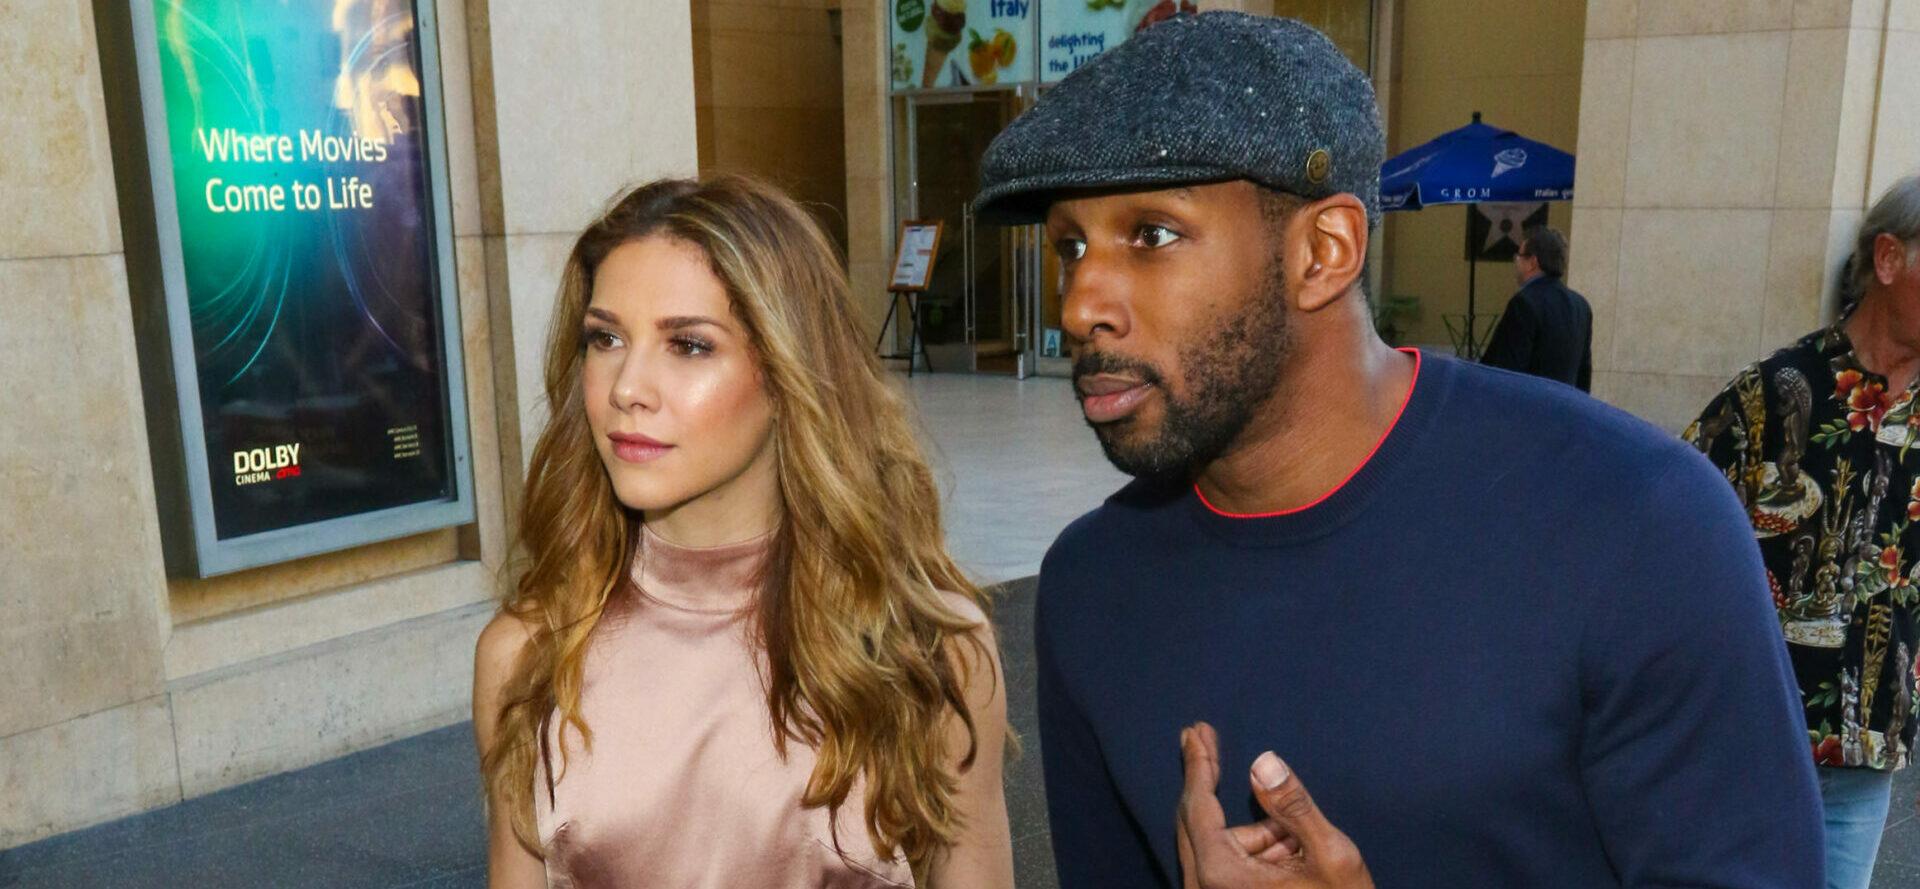 Allison Holker Preparing To Lay To Rest Her ‘One & Only’ Stephen ‘tWitch’ Boss